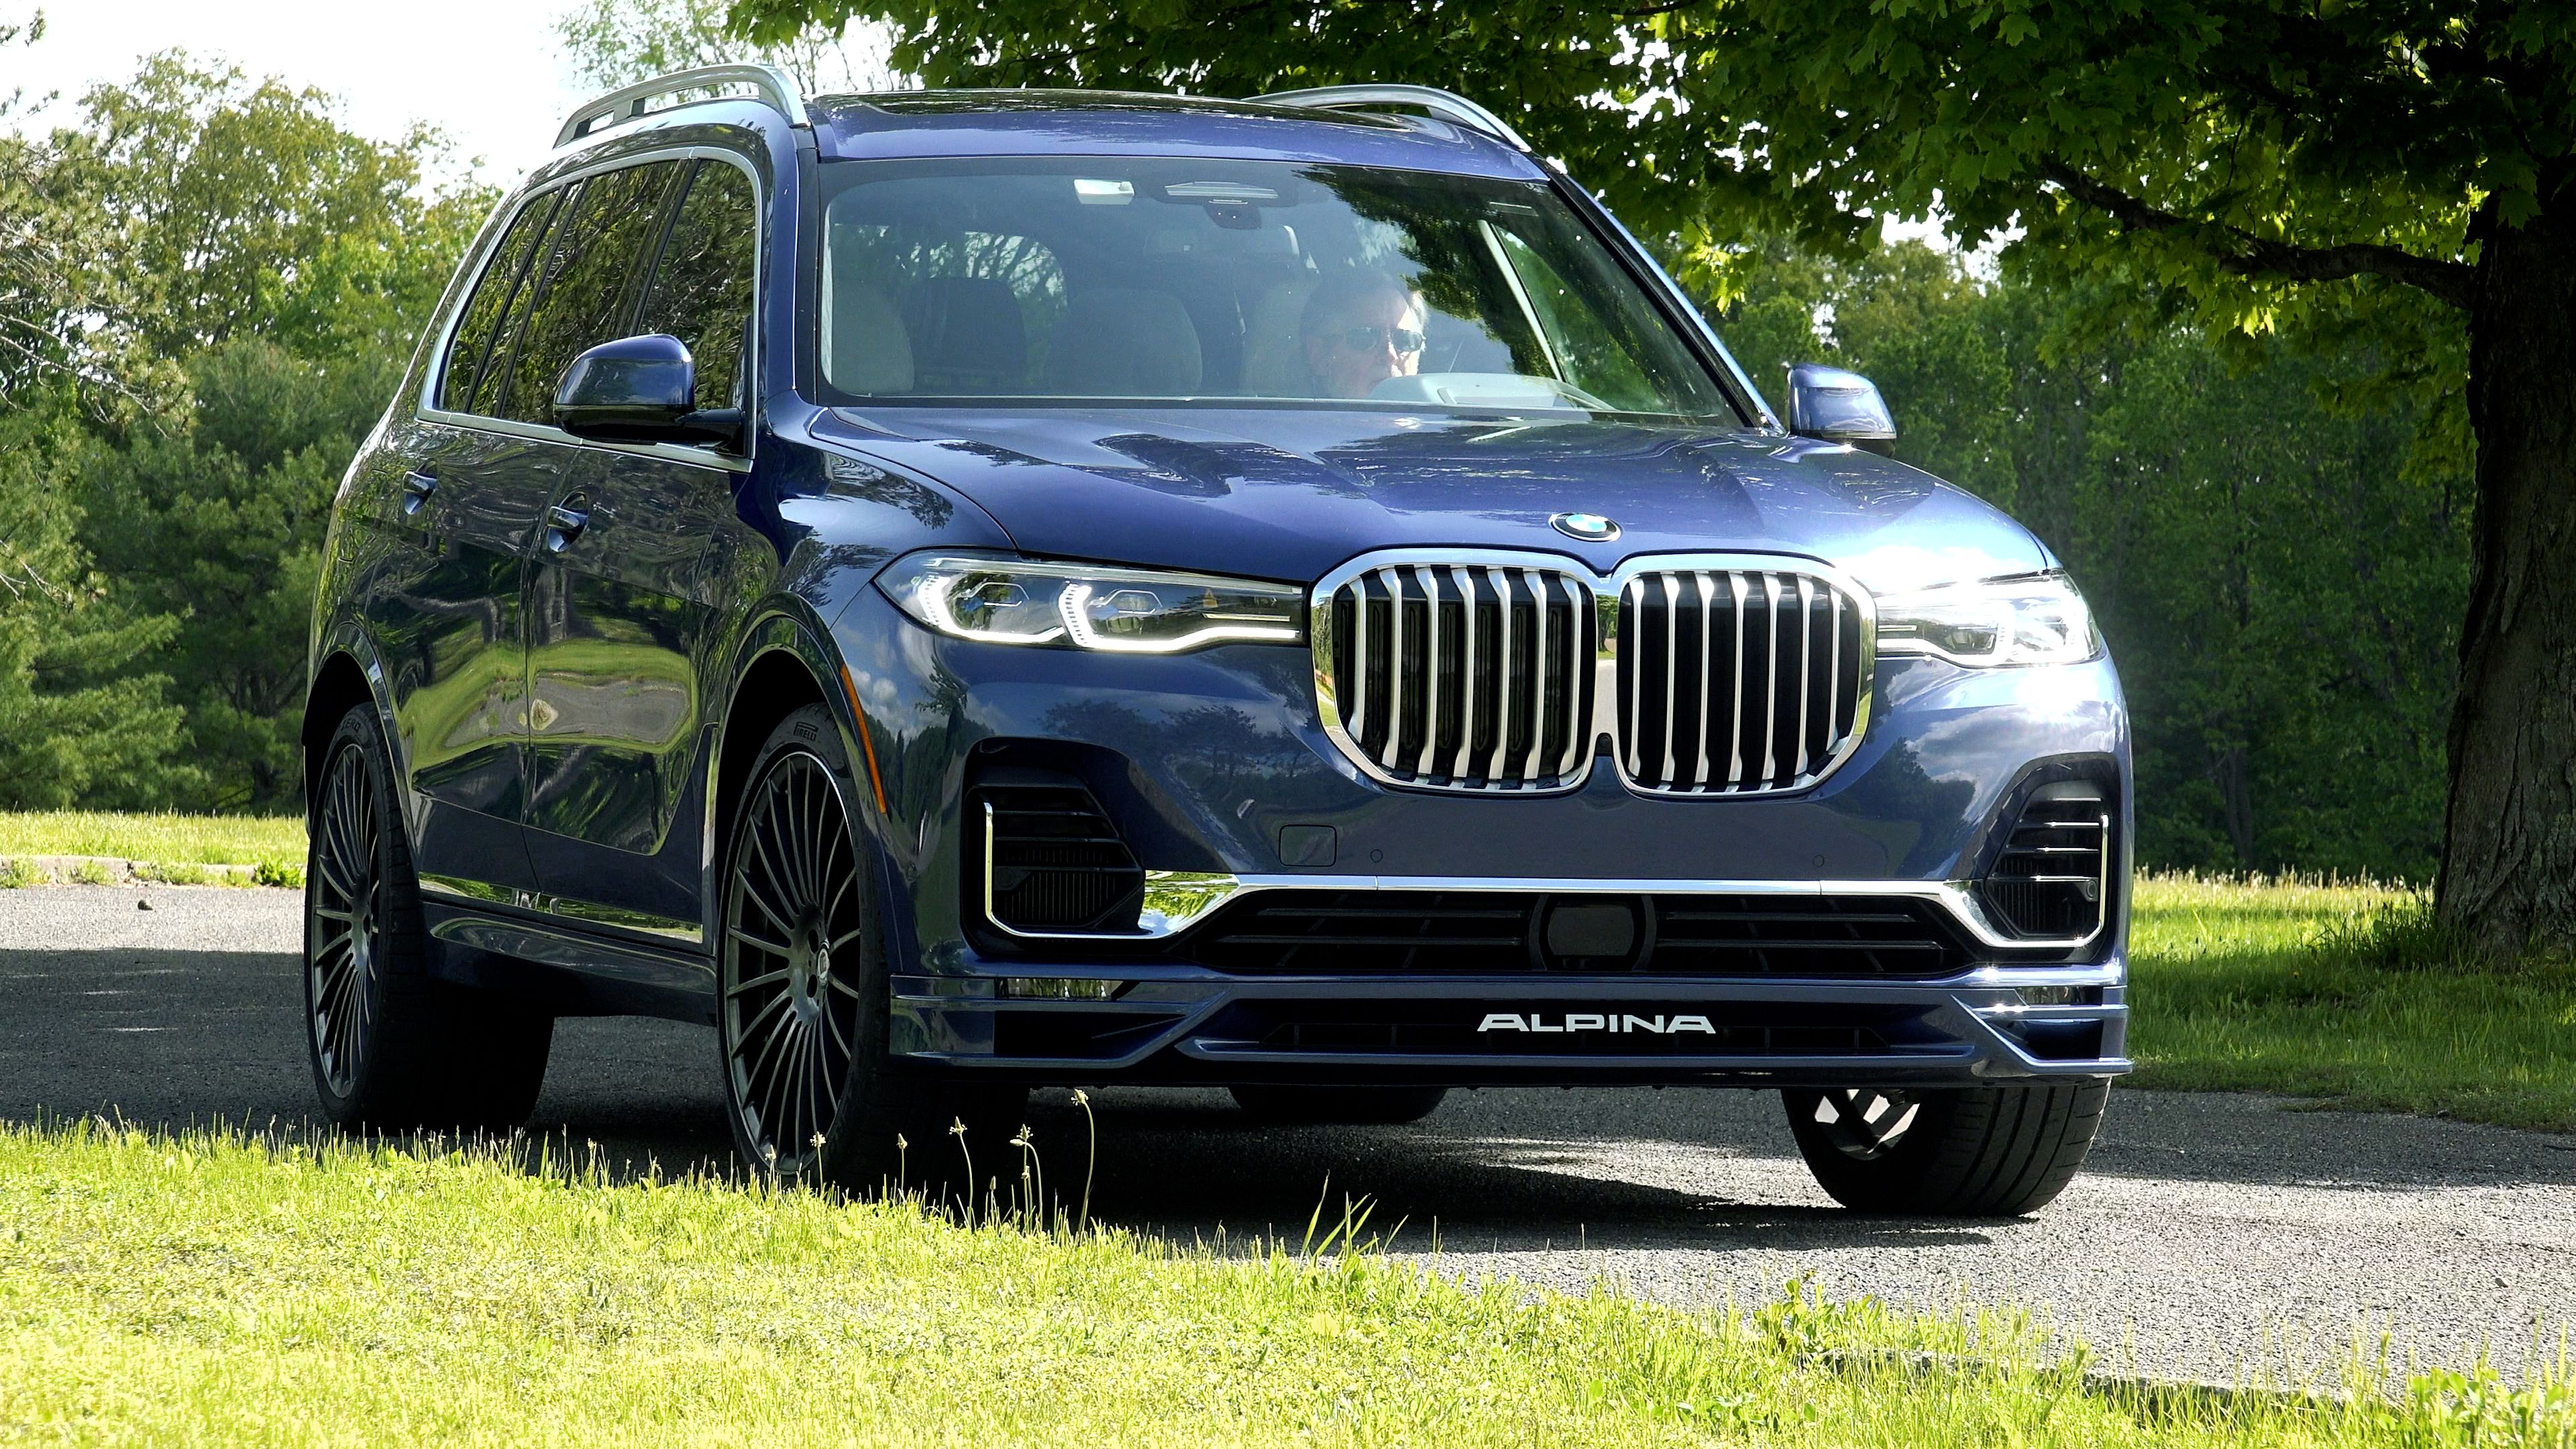 2022 ALPINA XB7: The Most Exclusive BMW SUV Money Can Buy